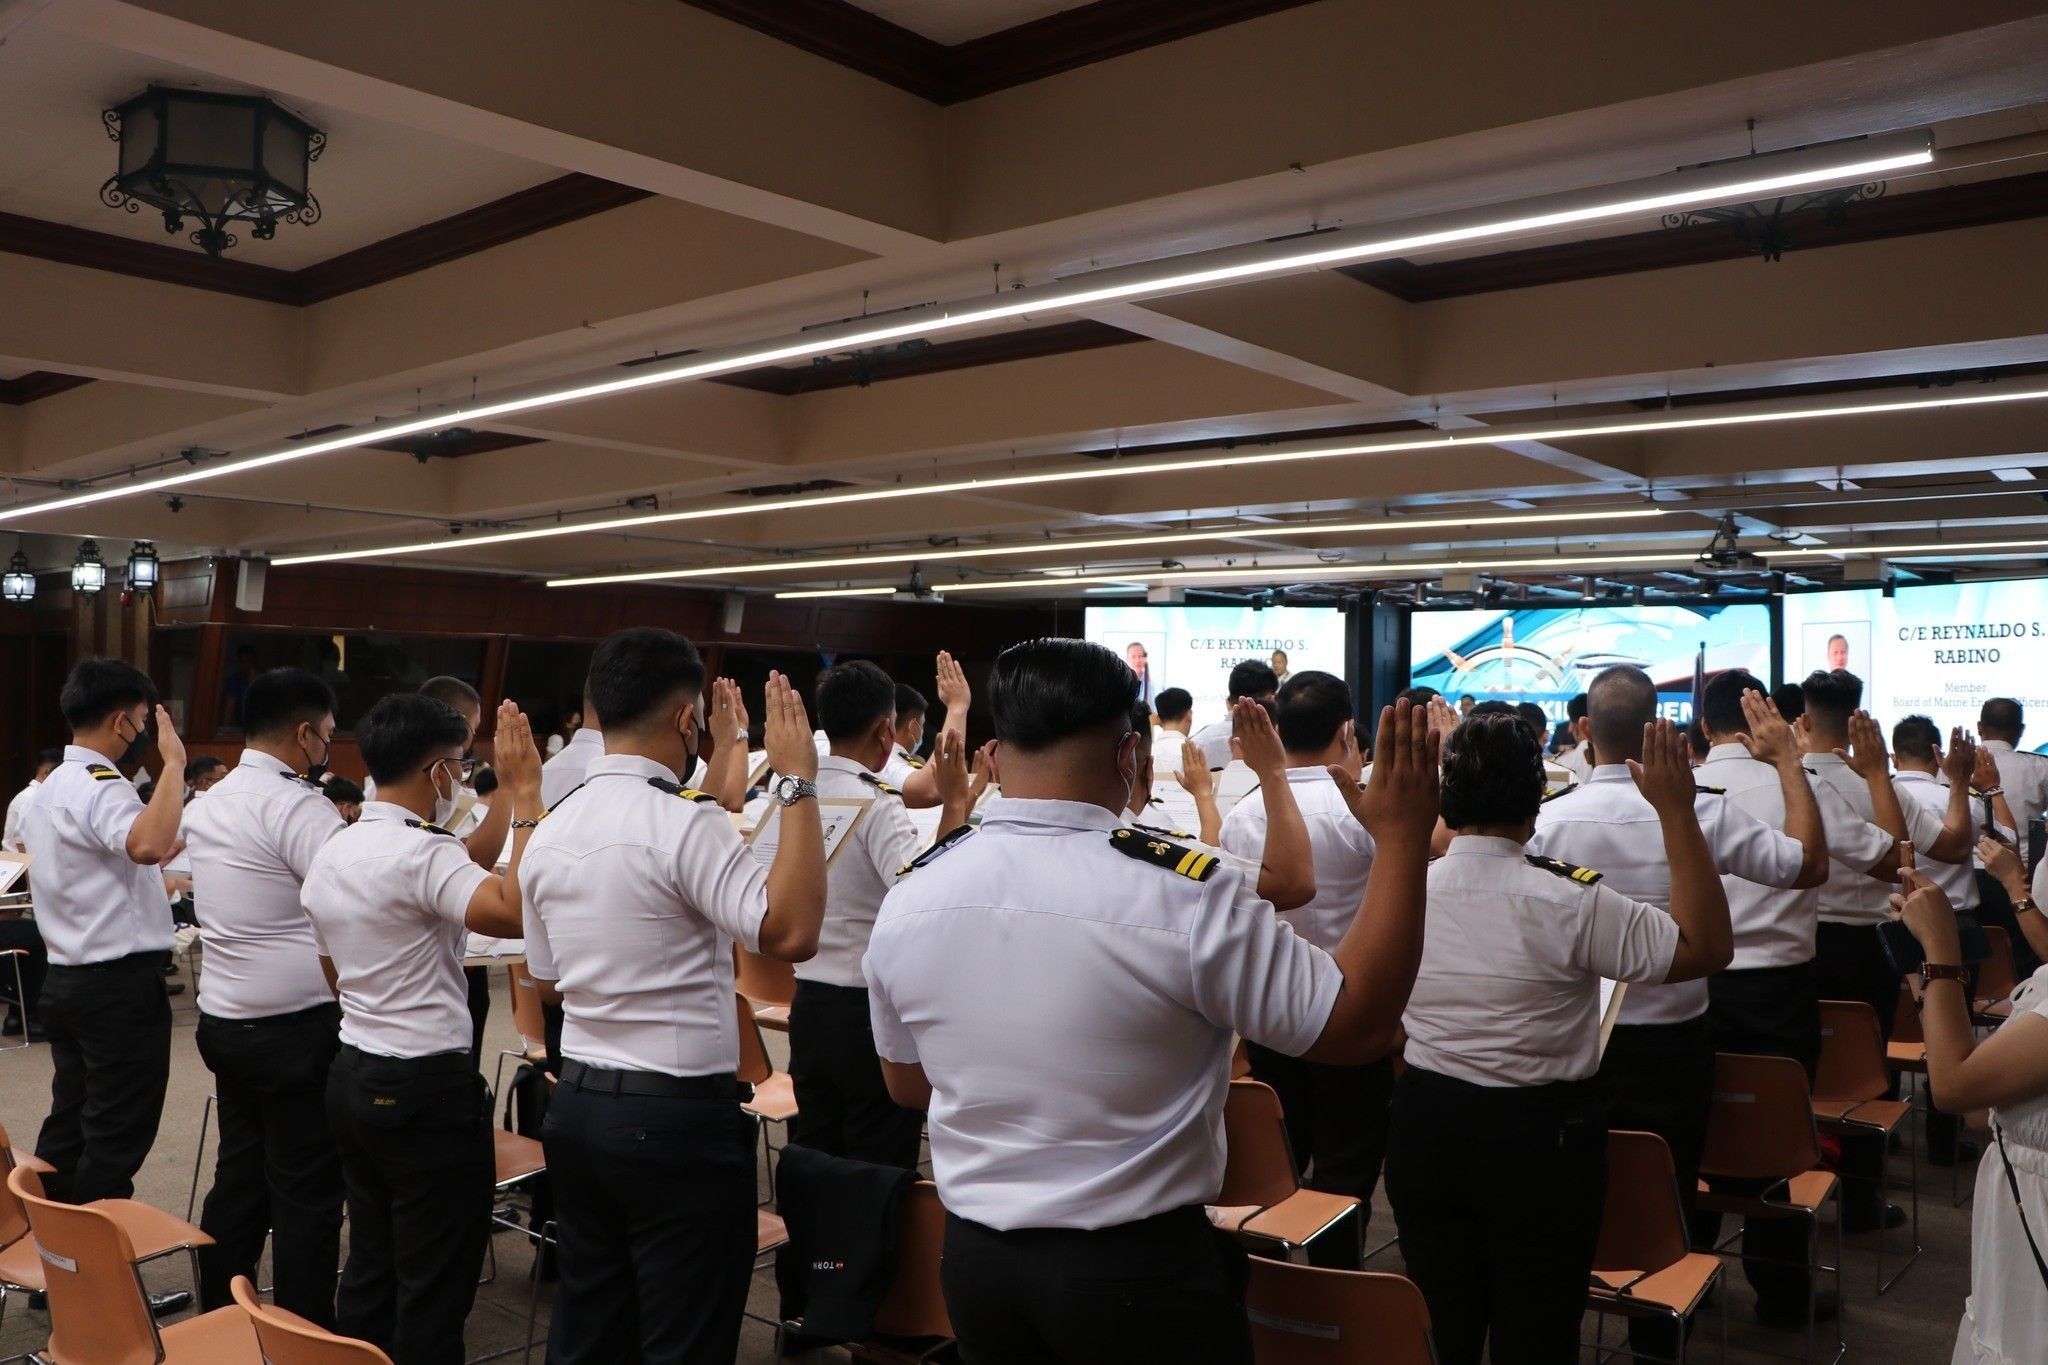 Marcos lauds important contributions of Filipino seafarers to country's progress